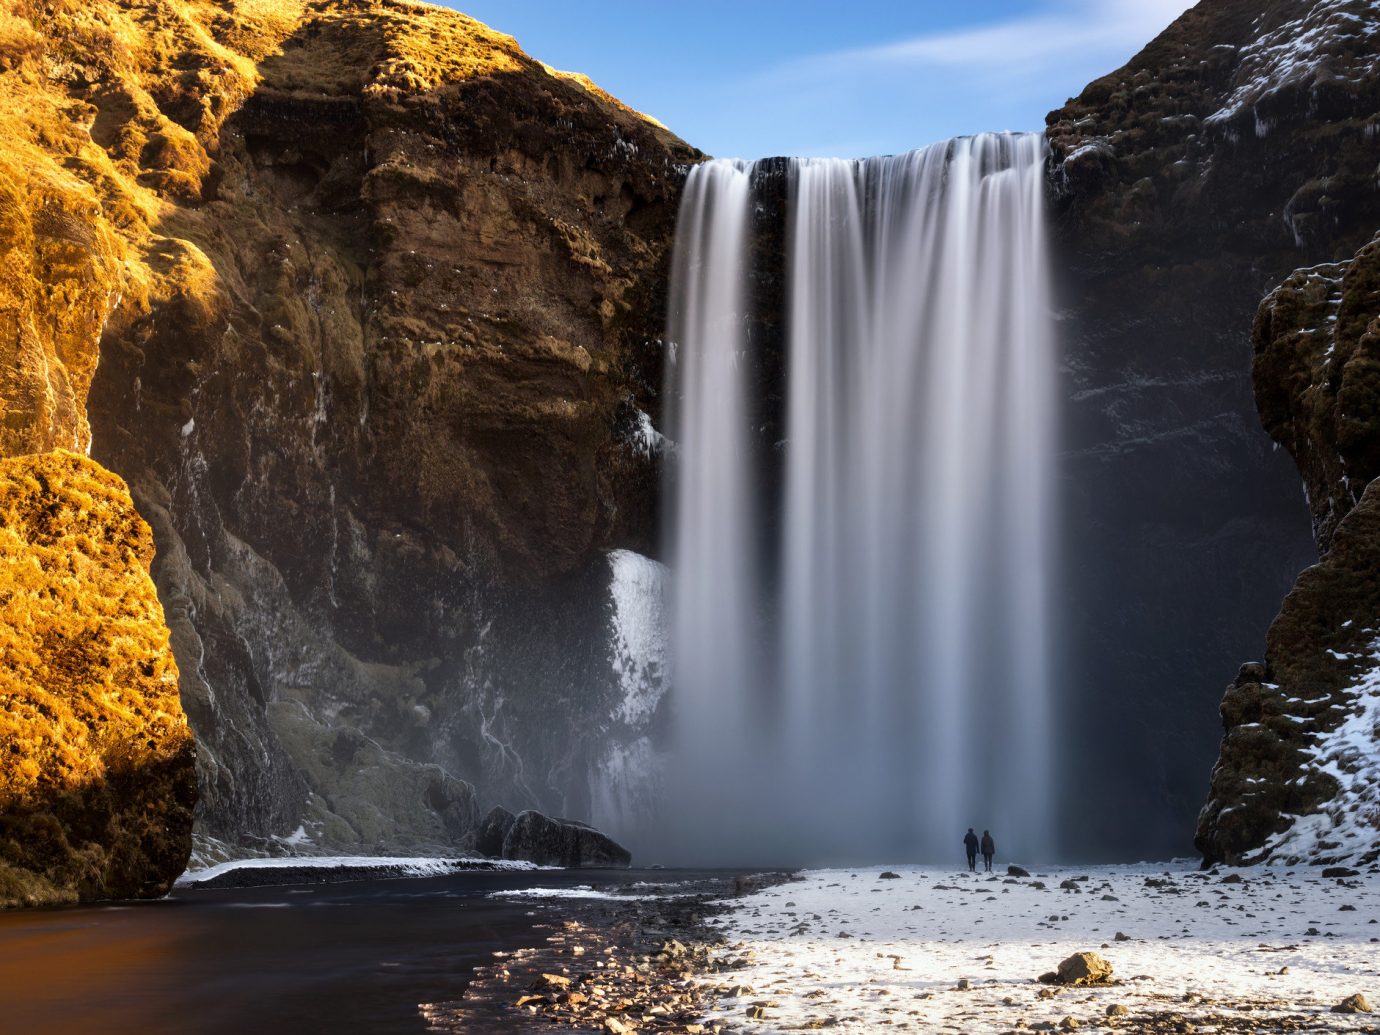 View of a waterfall in Iceland